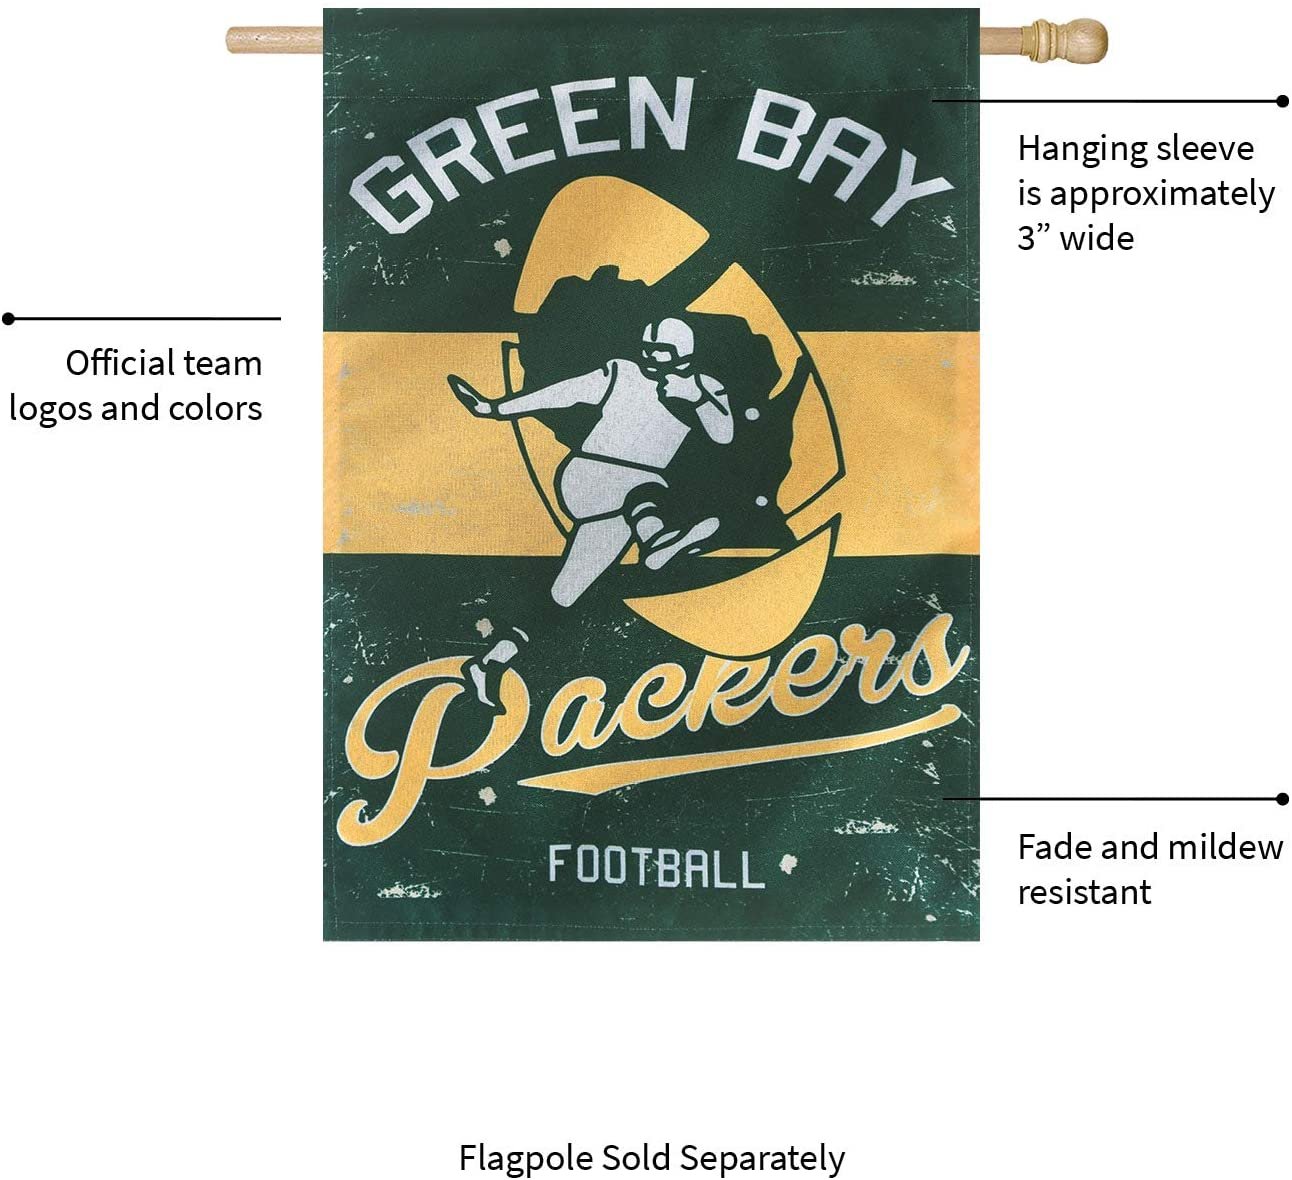 Green Bay Packers Premium Garden Flag Banner, Double Sided, Retro Vintage Style, Linen, 13x18 Inch